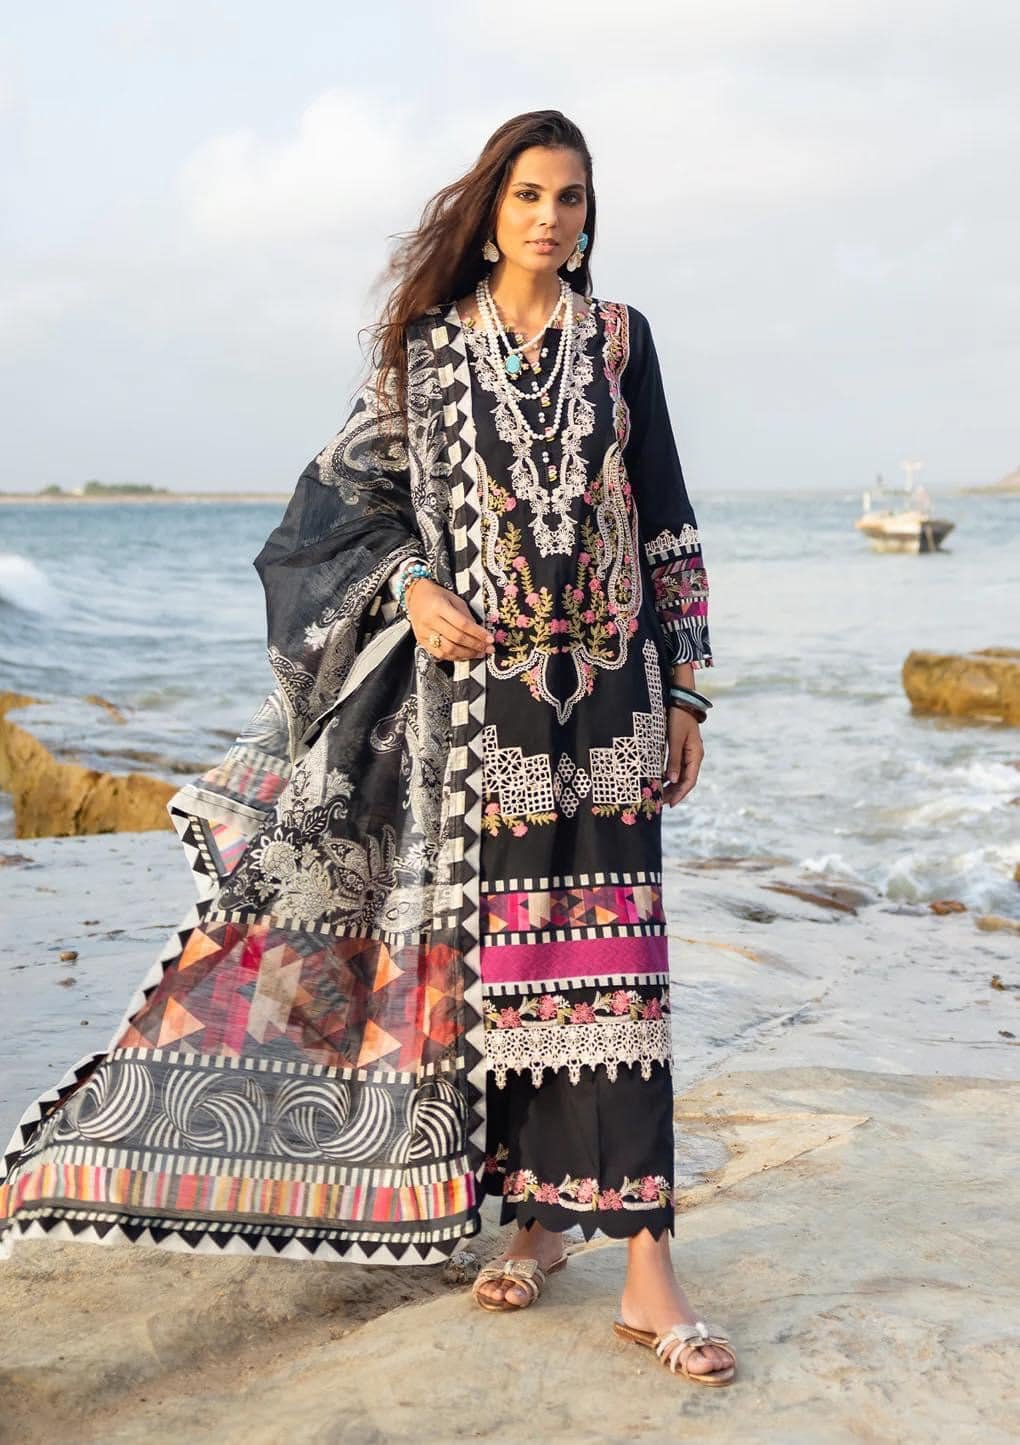 Elaf Signature Embroidered Lawn